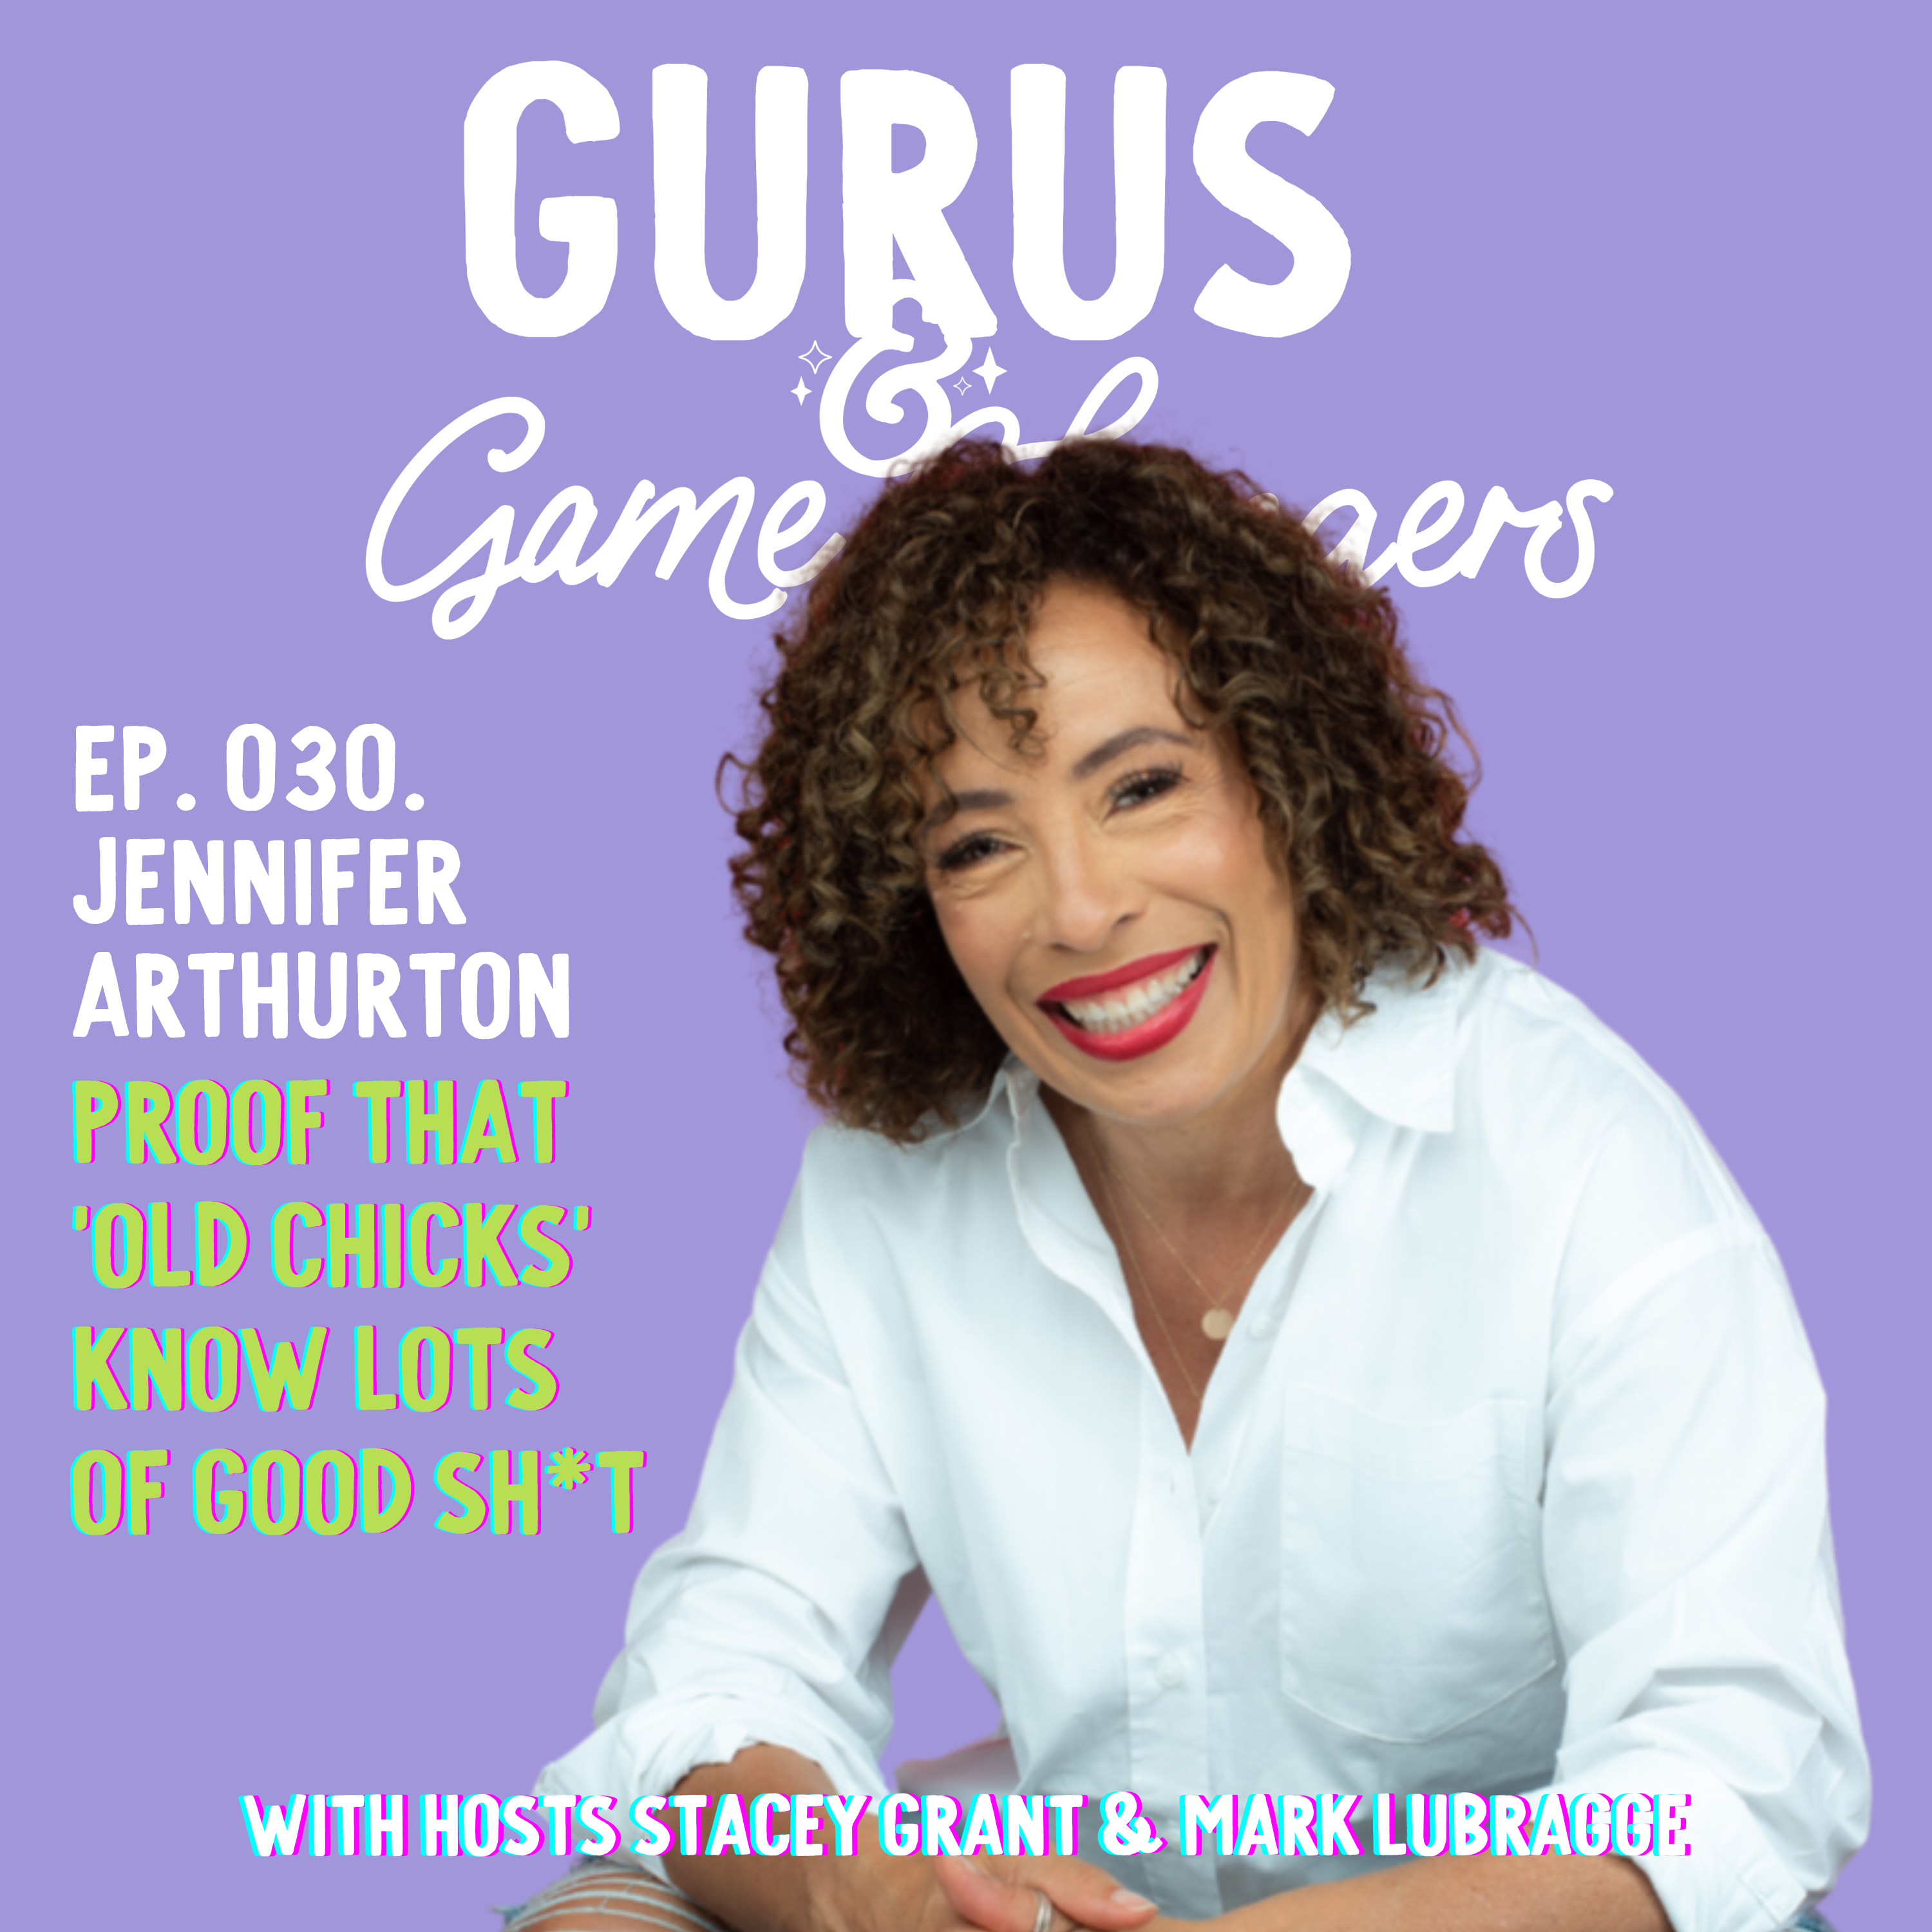 Jennifer Arthurton on Gurus & Game Changers podcast cover, symbolizing midlife empowerment and transformation.